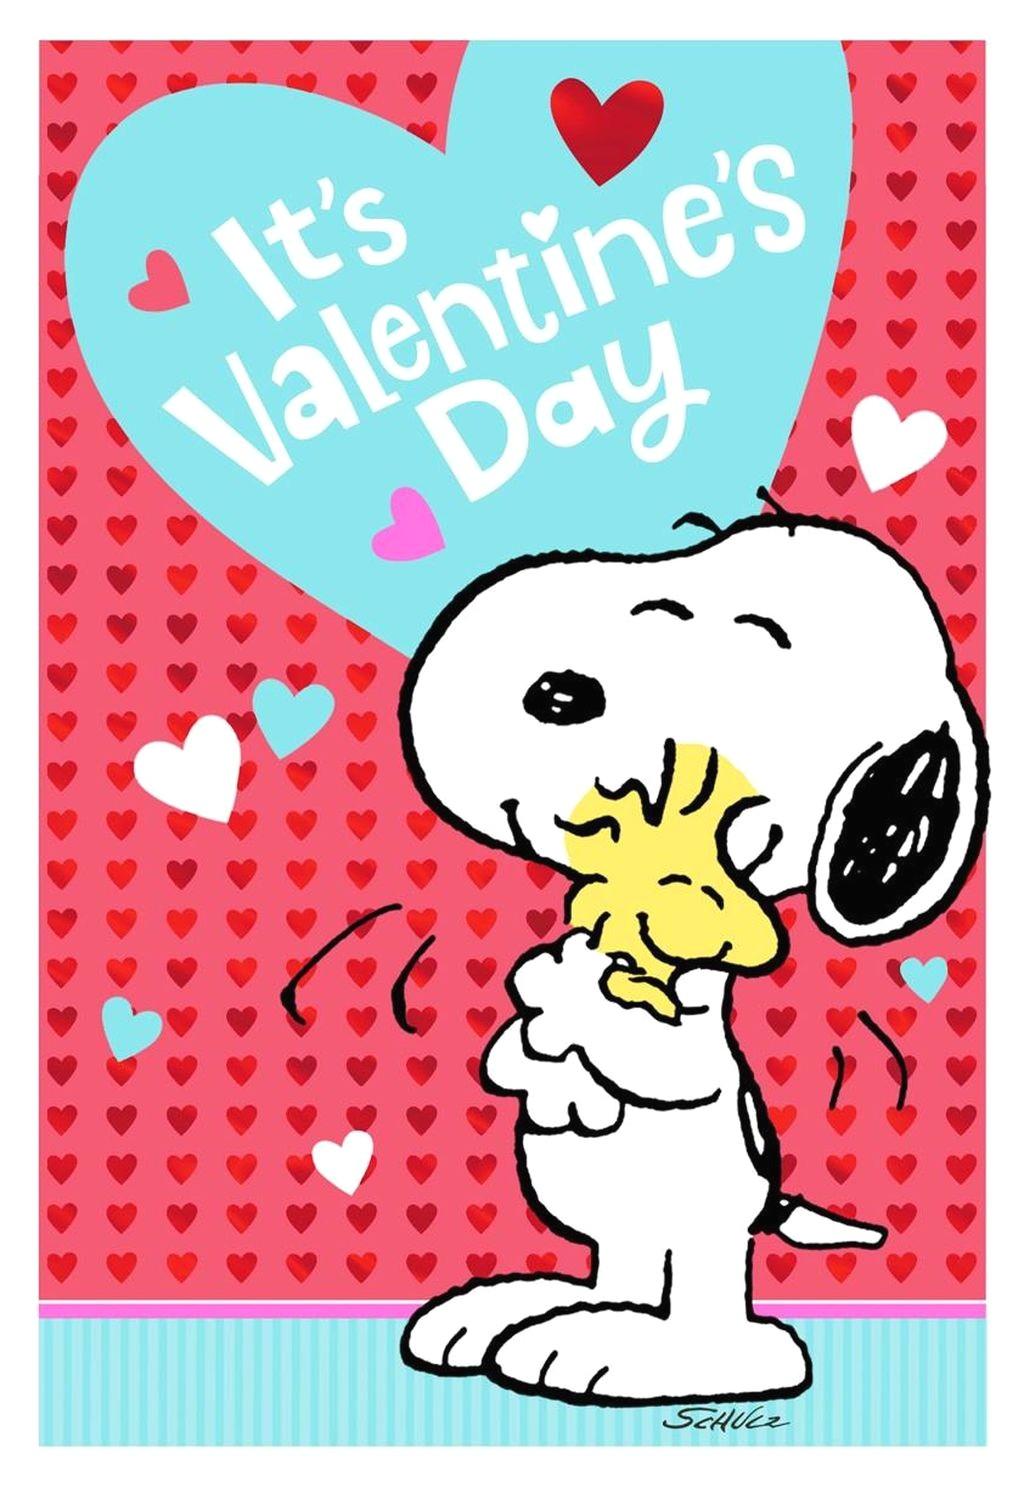 Download Snoopy Valentines Day Wallpaper, HD Background